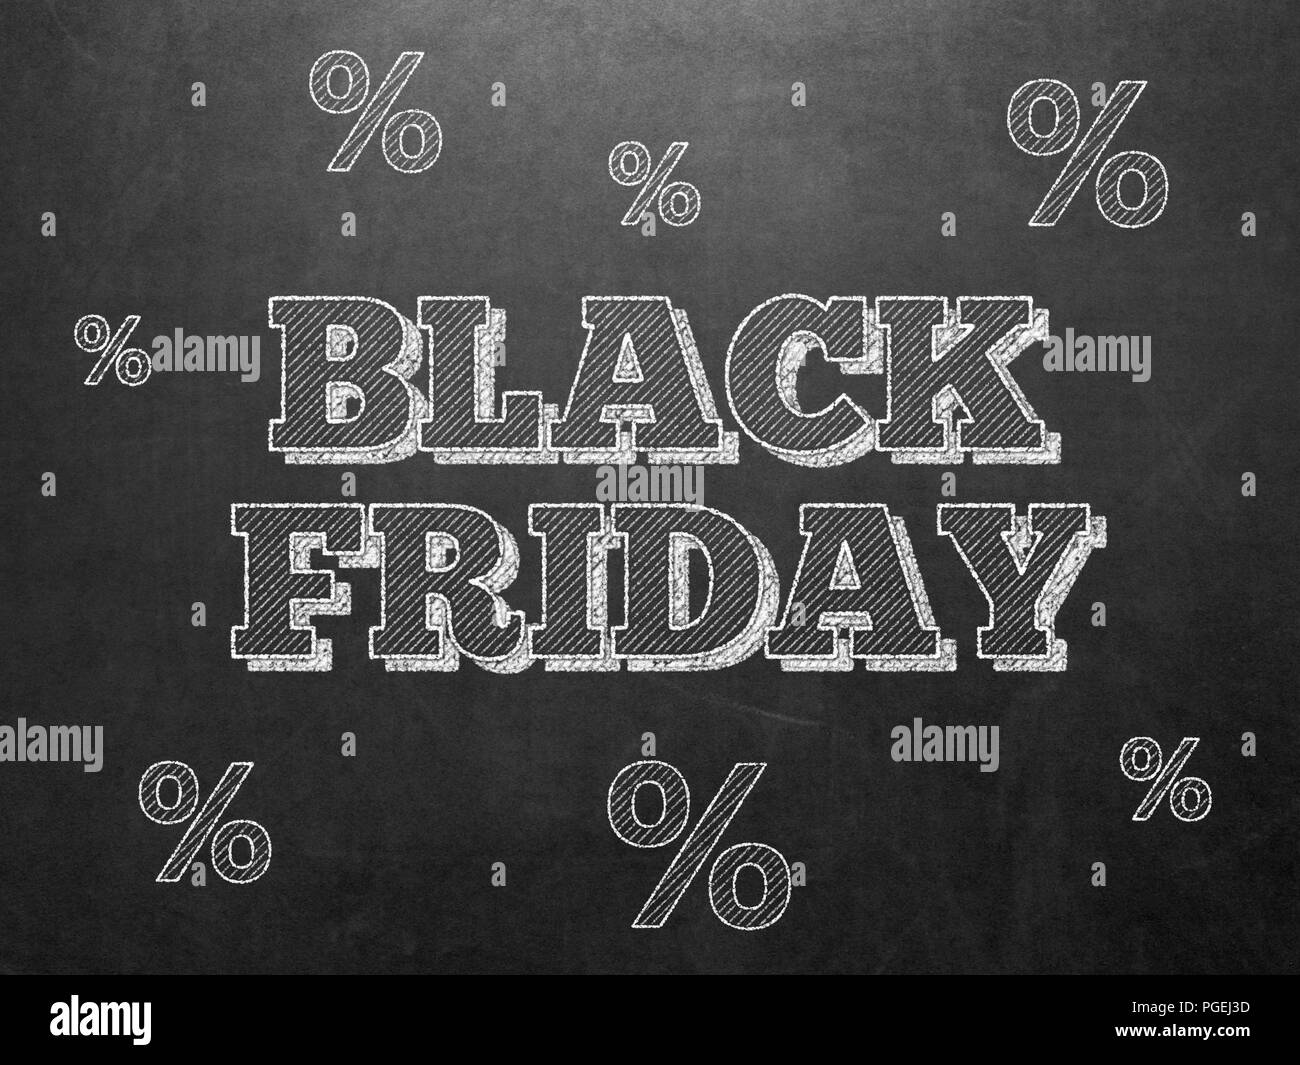 chalkboard texture with black friday title written Stock Photo